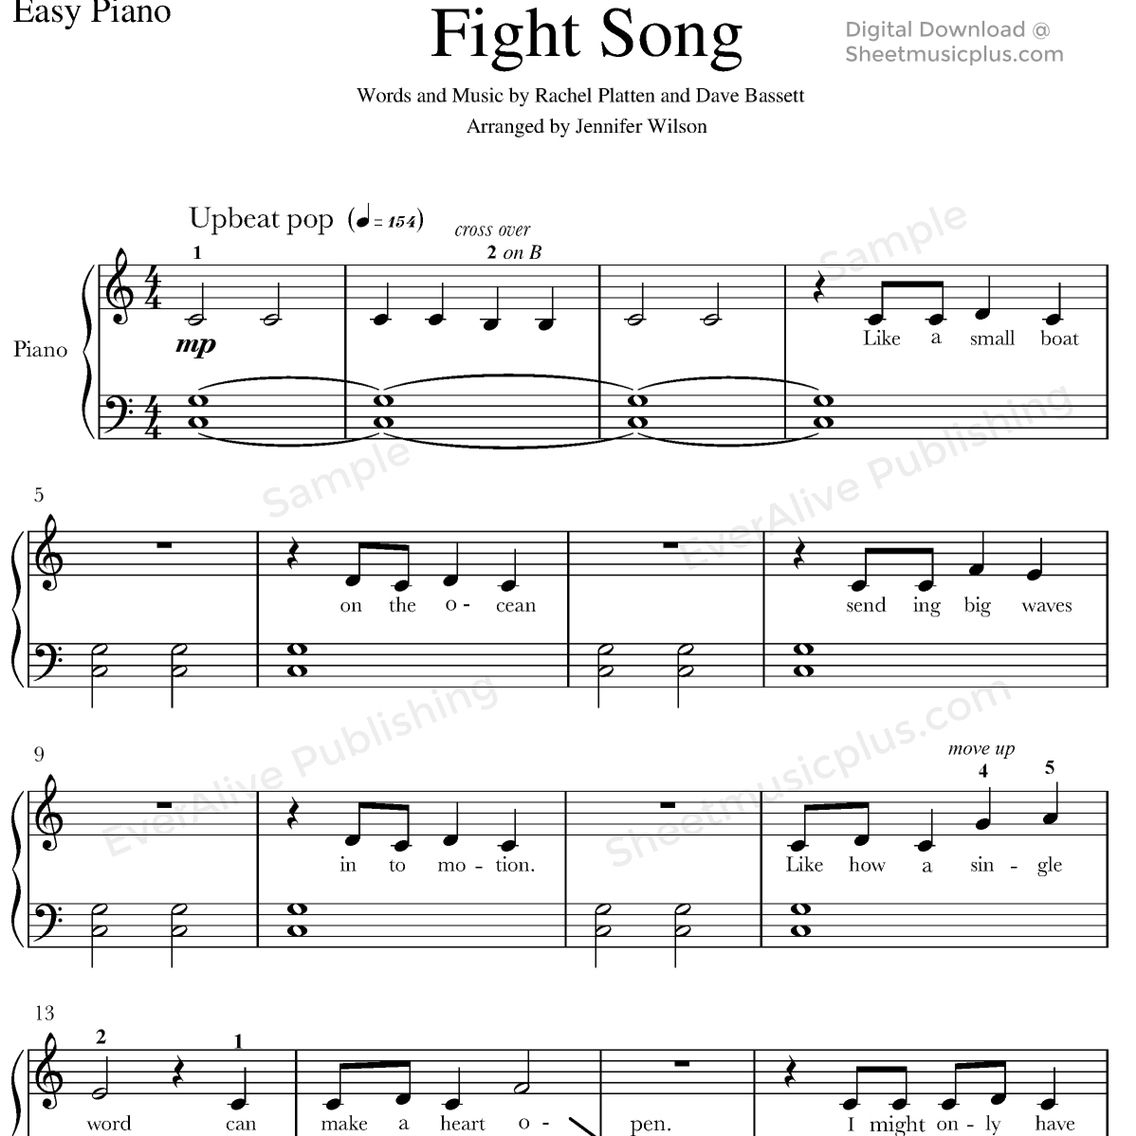 Pinbethany Trainor On Music In 2019 | Pinterest | Easy Piano - Free Printable Sheet Music For Piano Beginners Popular Songs